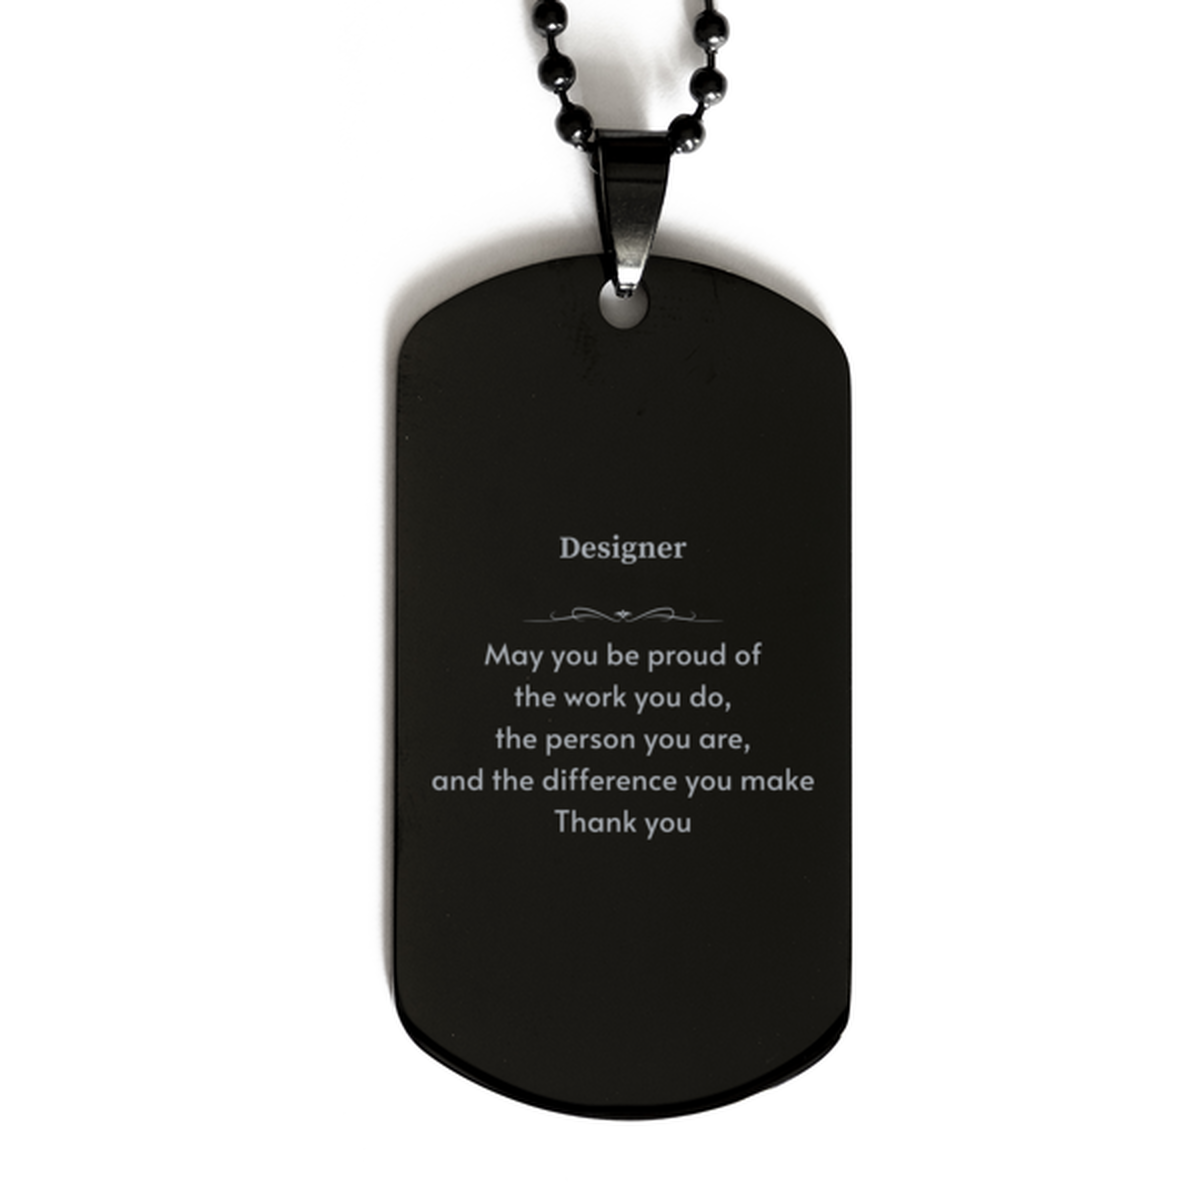 Heartwarming Black Dog Tag Retirement Coworkers Gifts for Designer, Designer May You be proud of the work you do, the person you are Gifts for Boss Men Women Friends